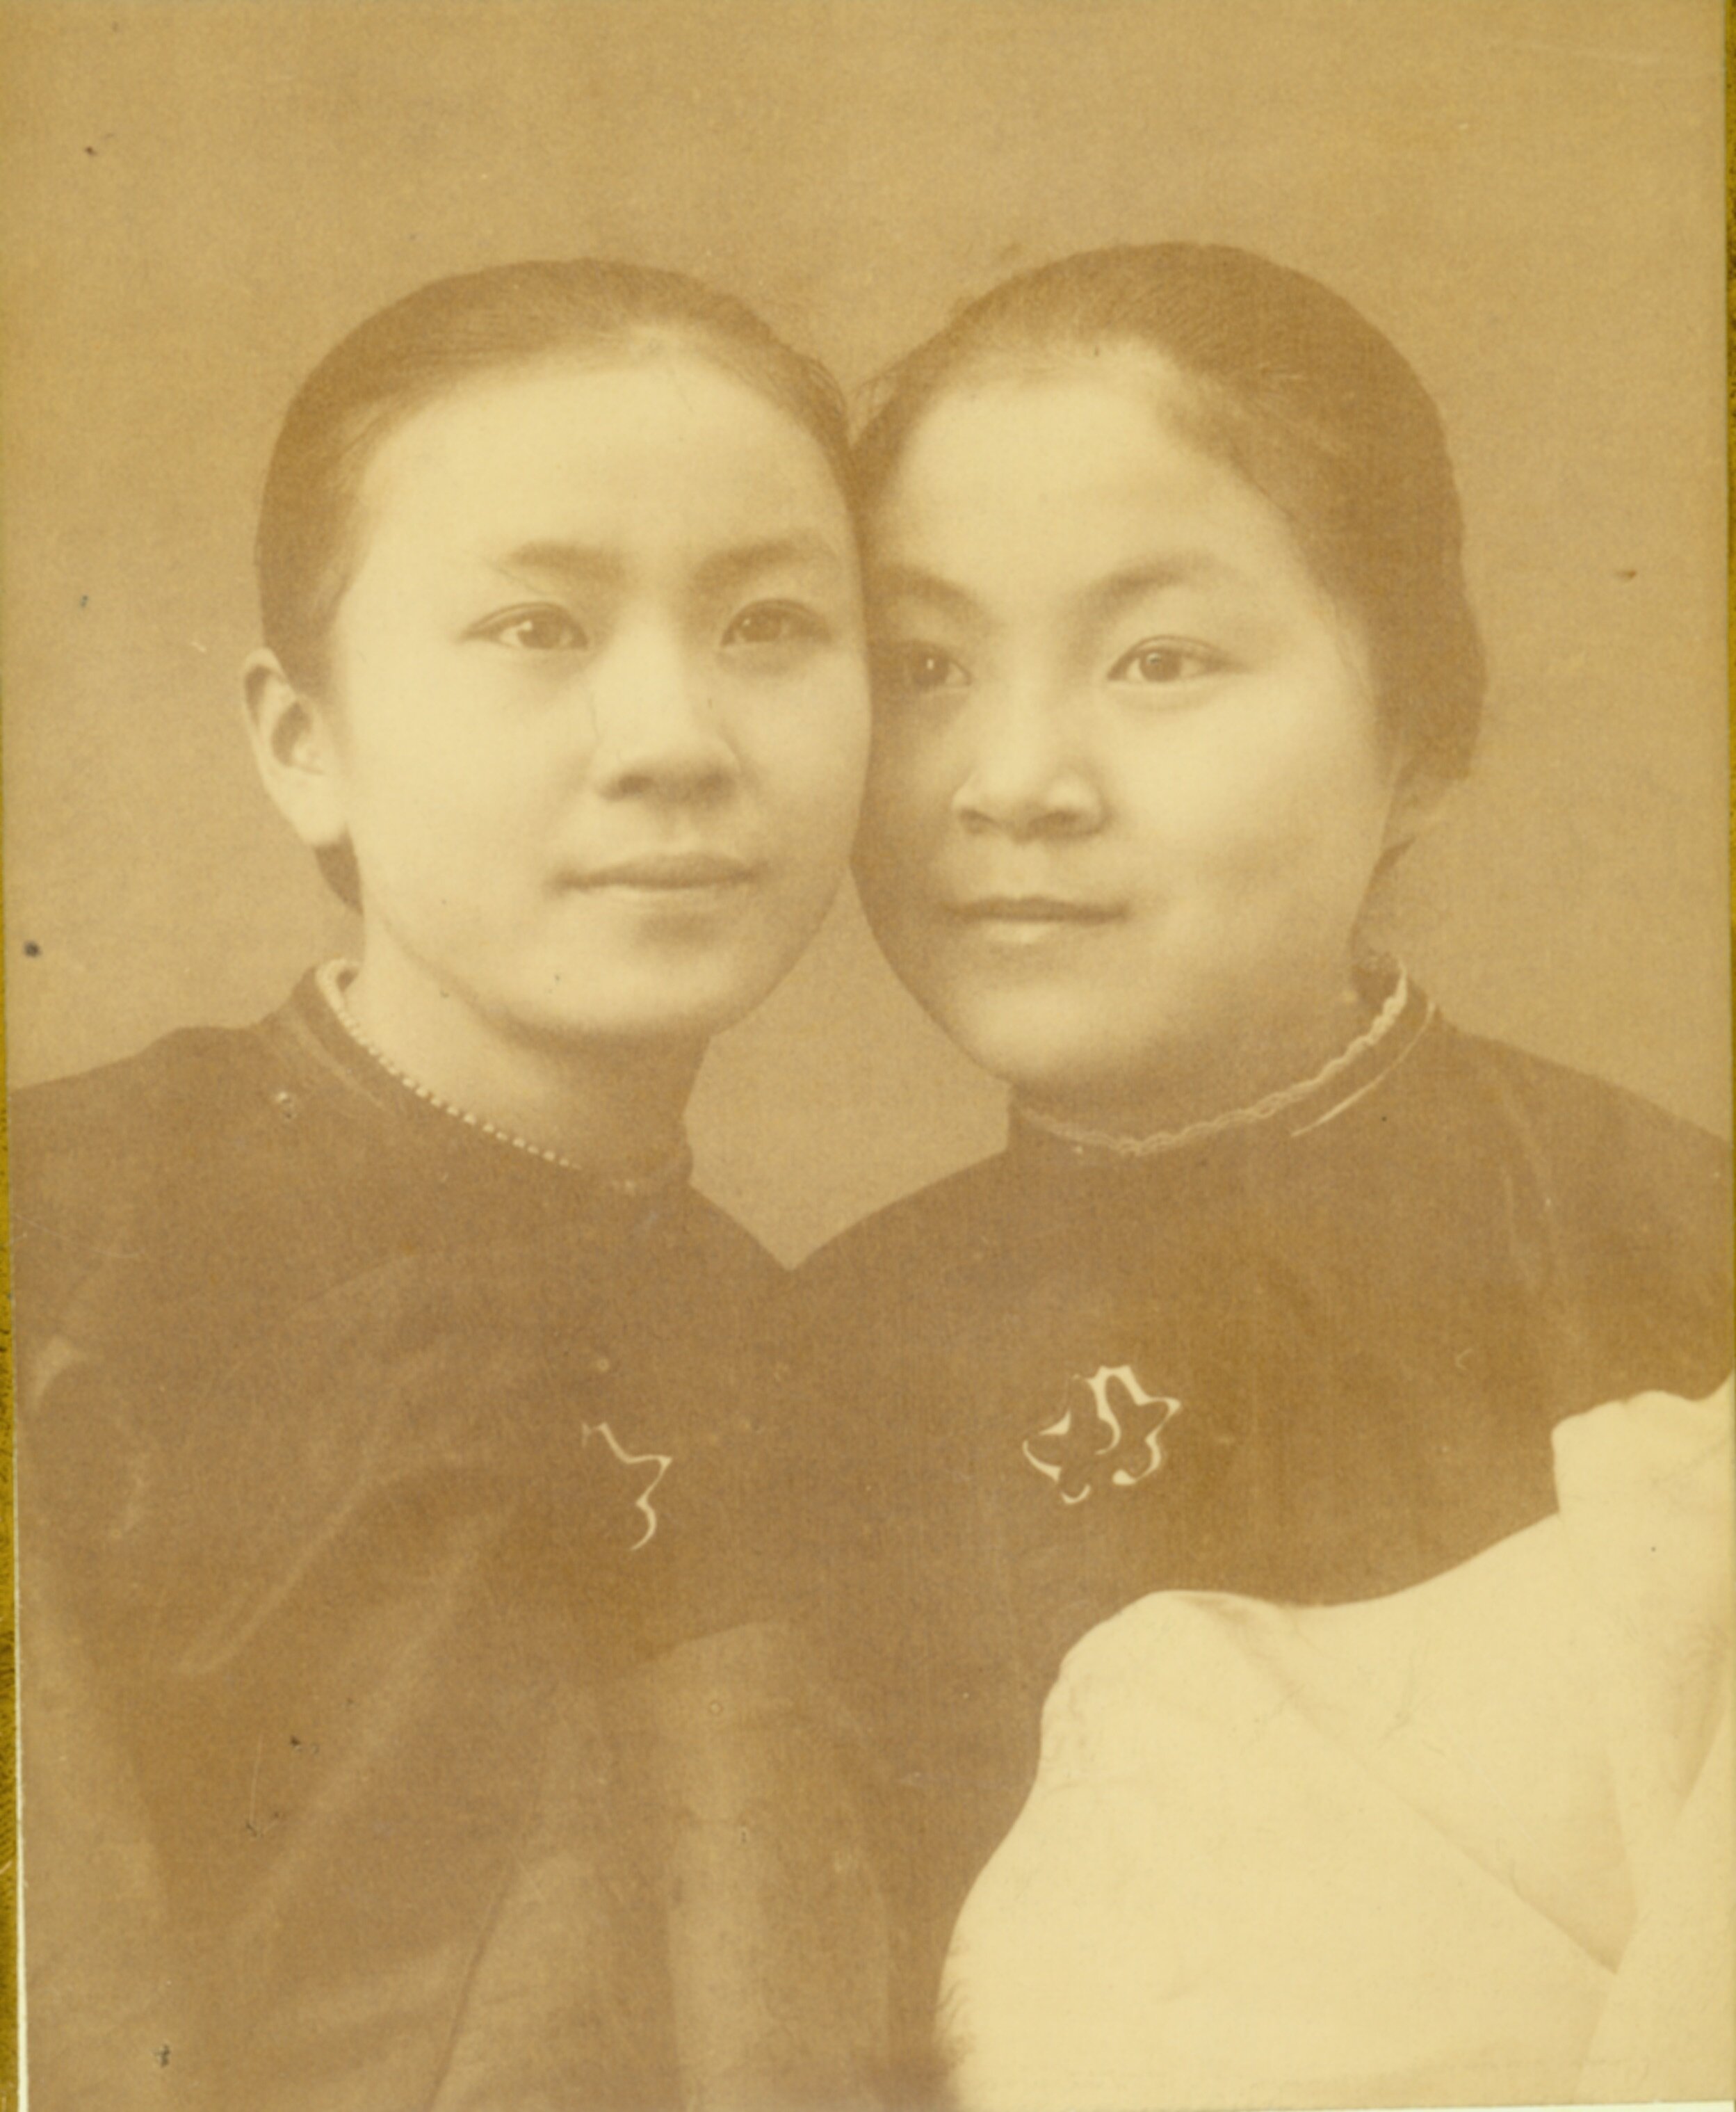  Medical missionaries Ida Kahn and Mary Stone brought Western medicine to China and also battled their Western missionary counterparts to treat their Chinese colleagues equitably.  